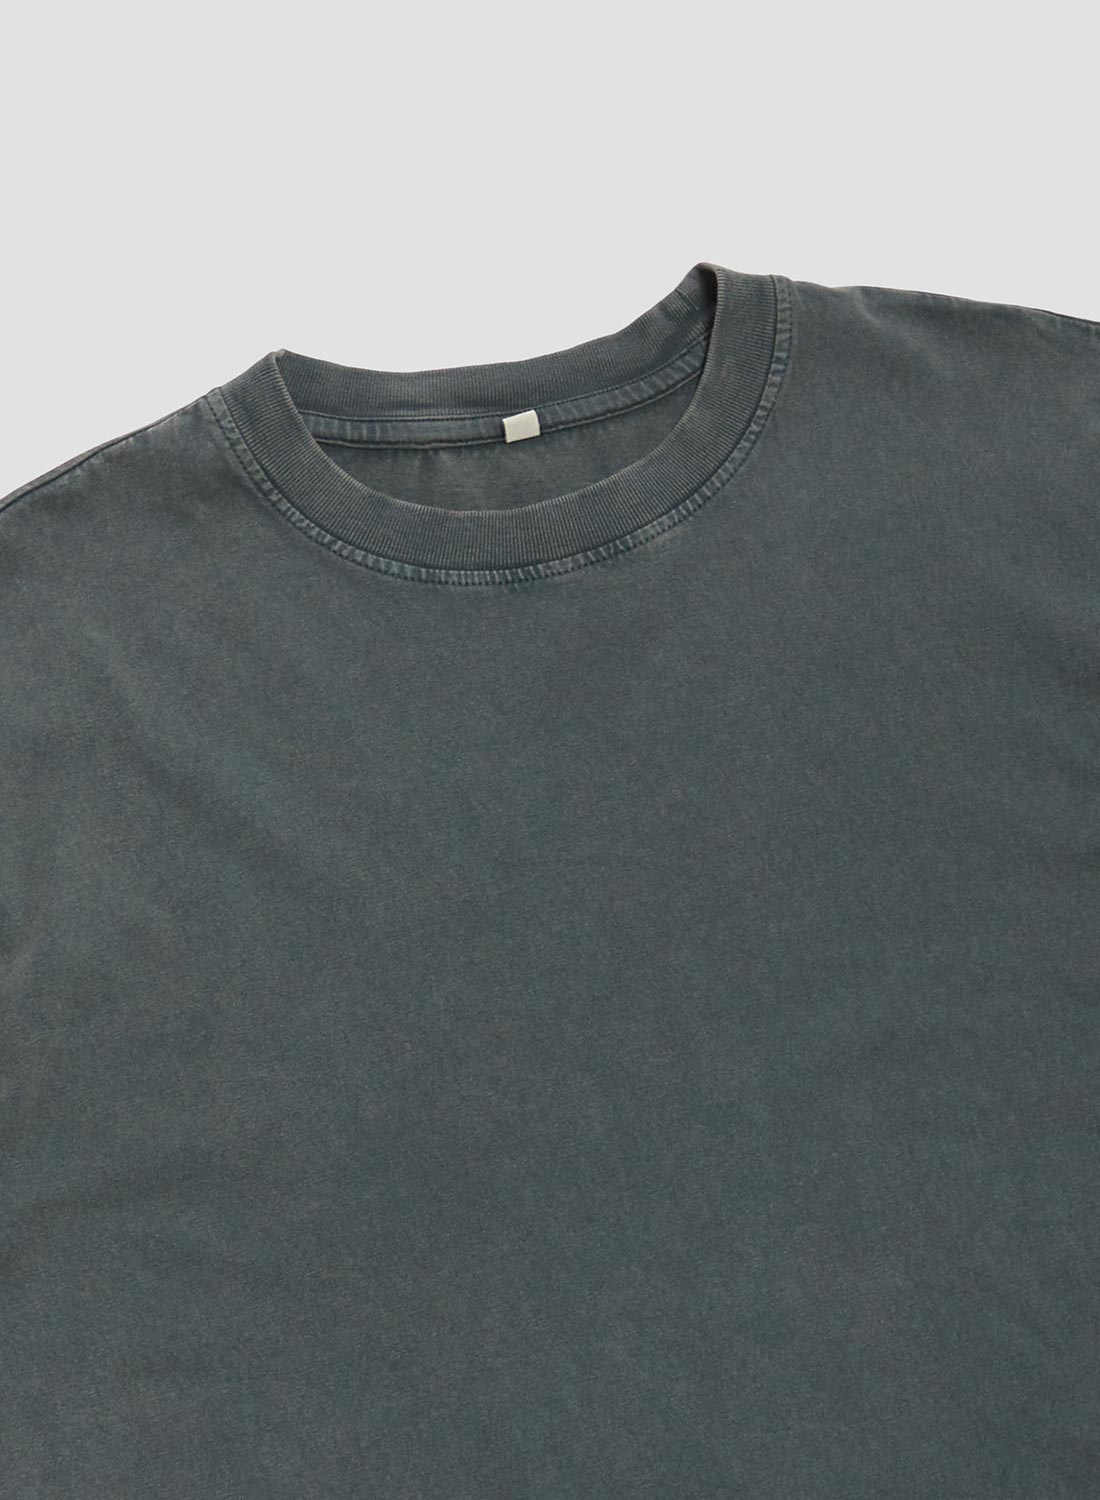 Classic Relaxed Fit Tee in Stone Wash Green - 5